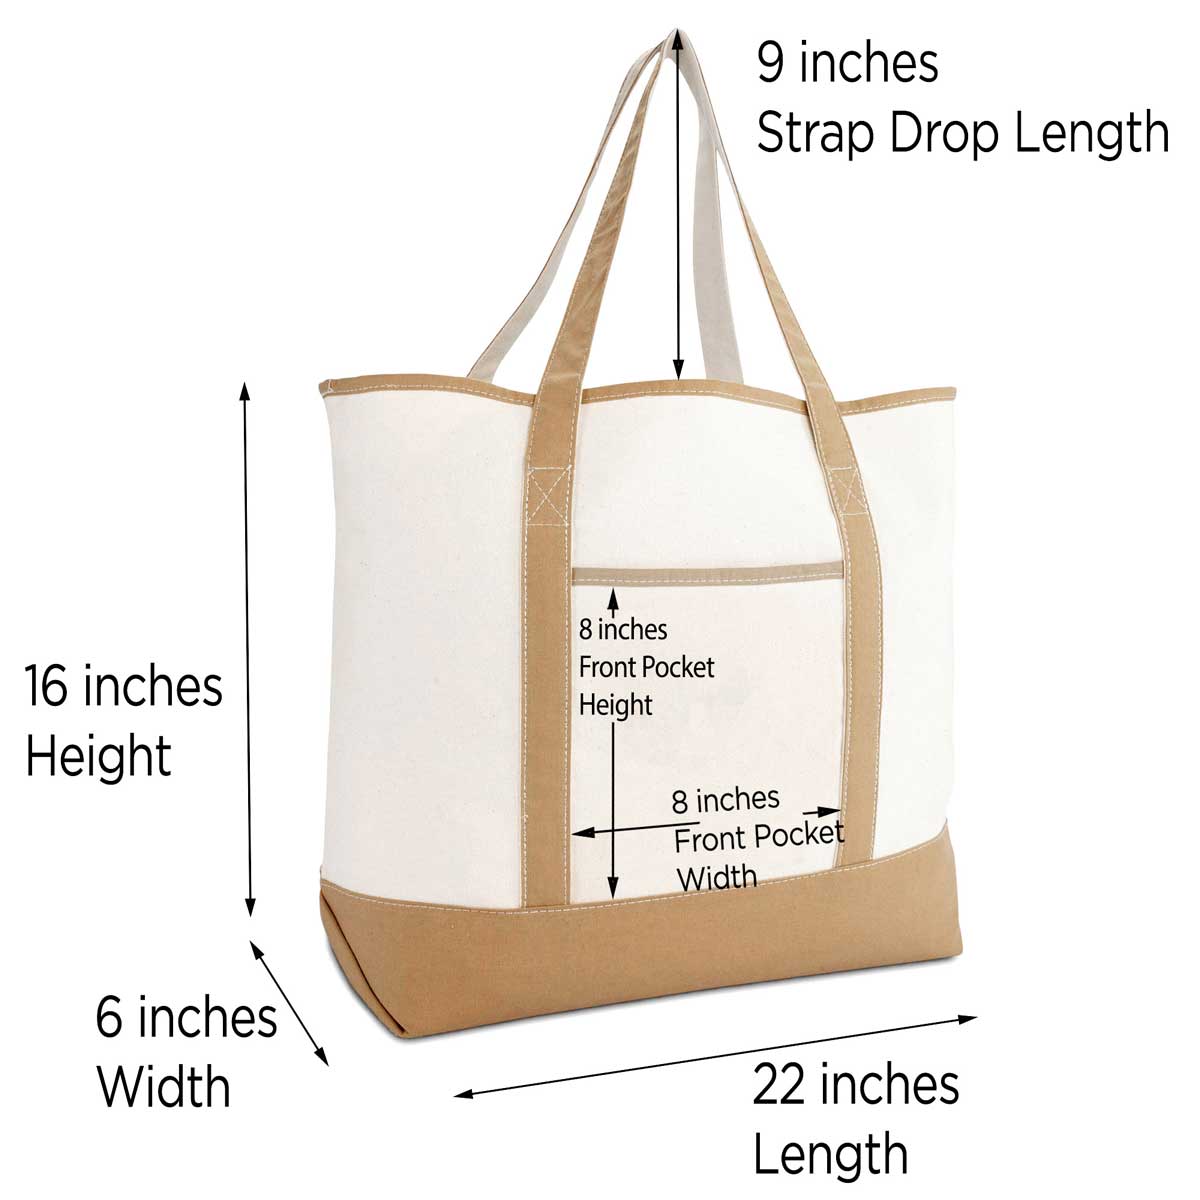 Lands End Canvas Tote Bag large open top 3 shades of brown l new